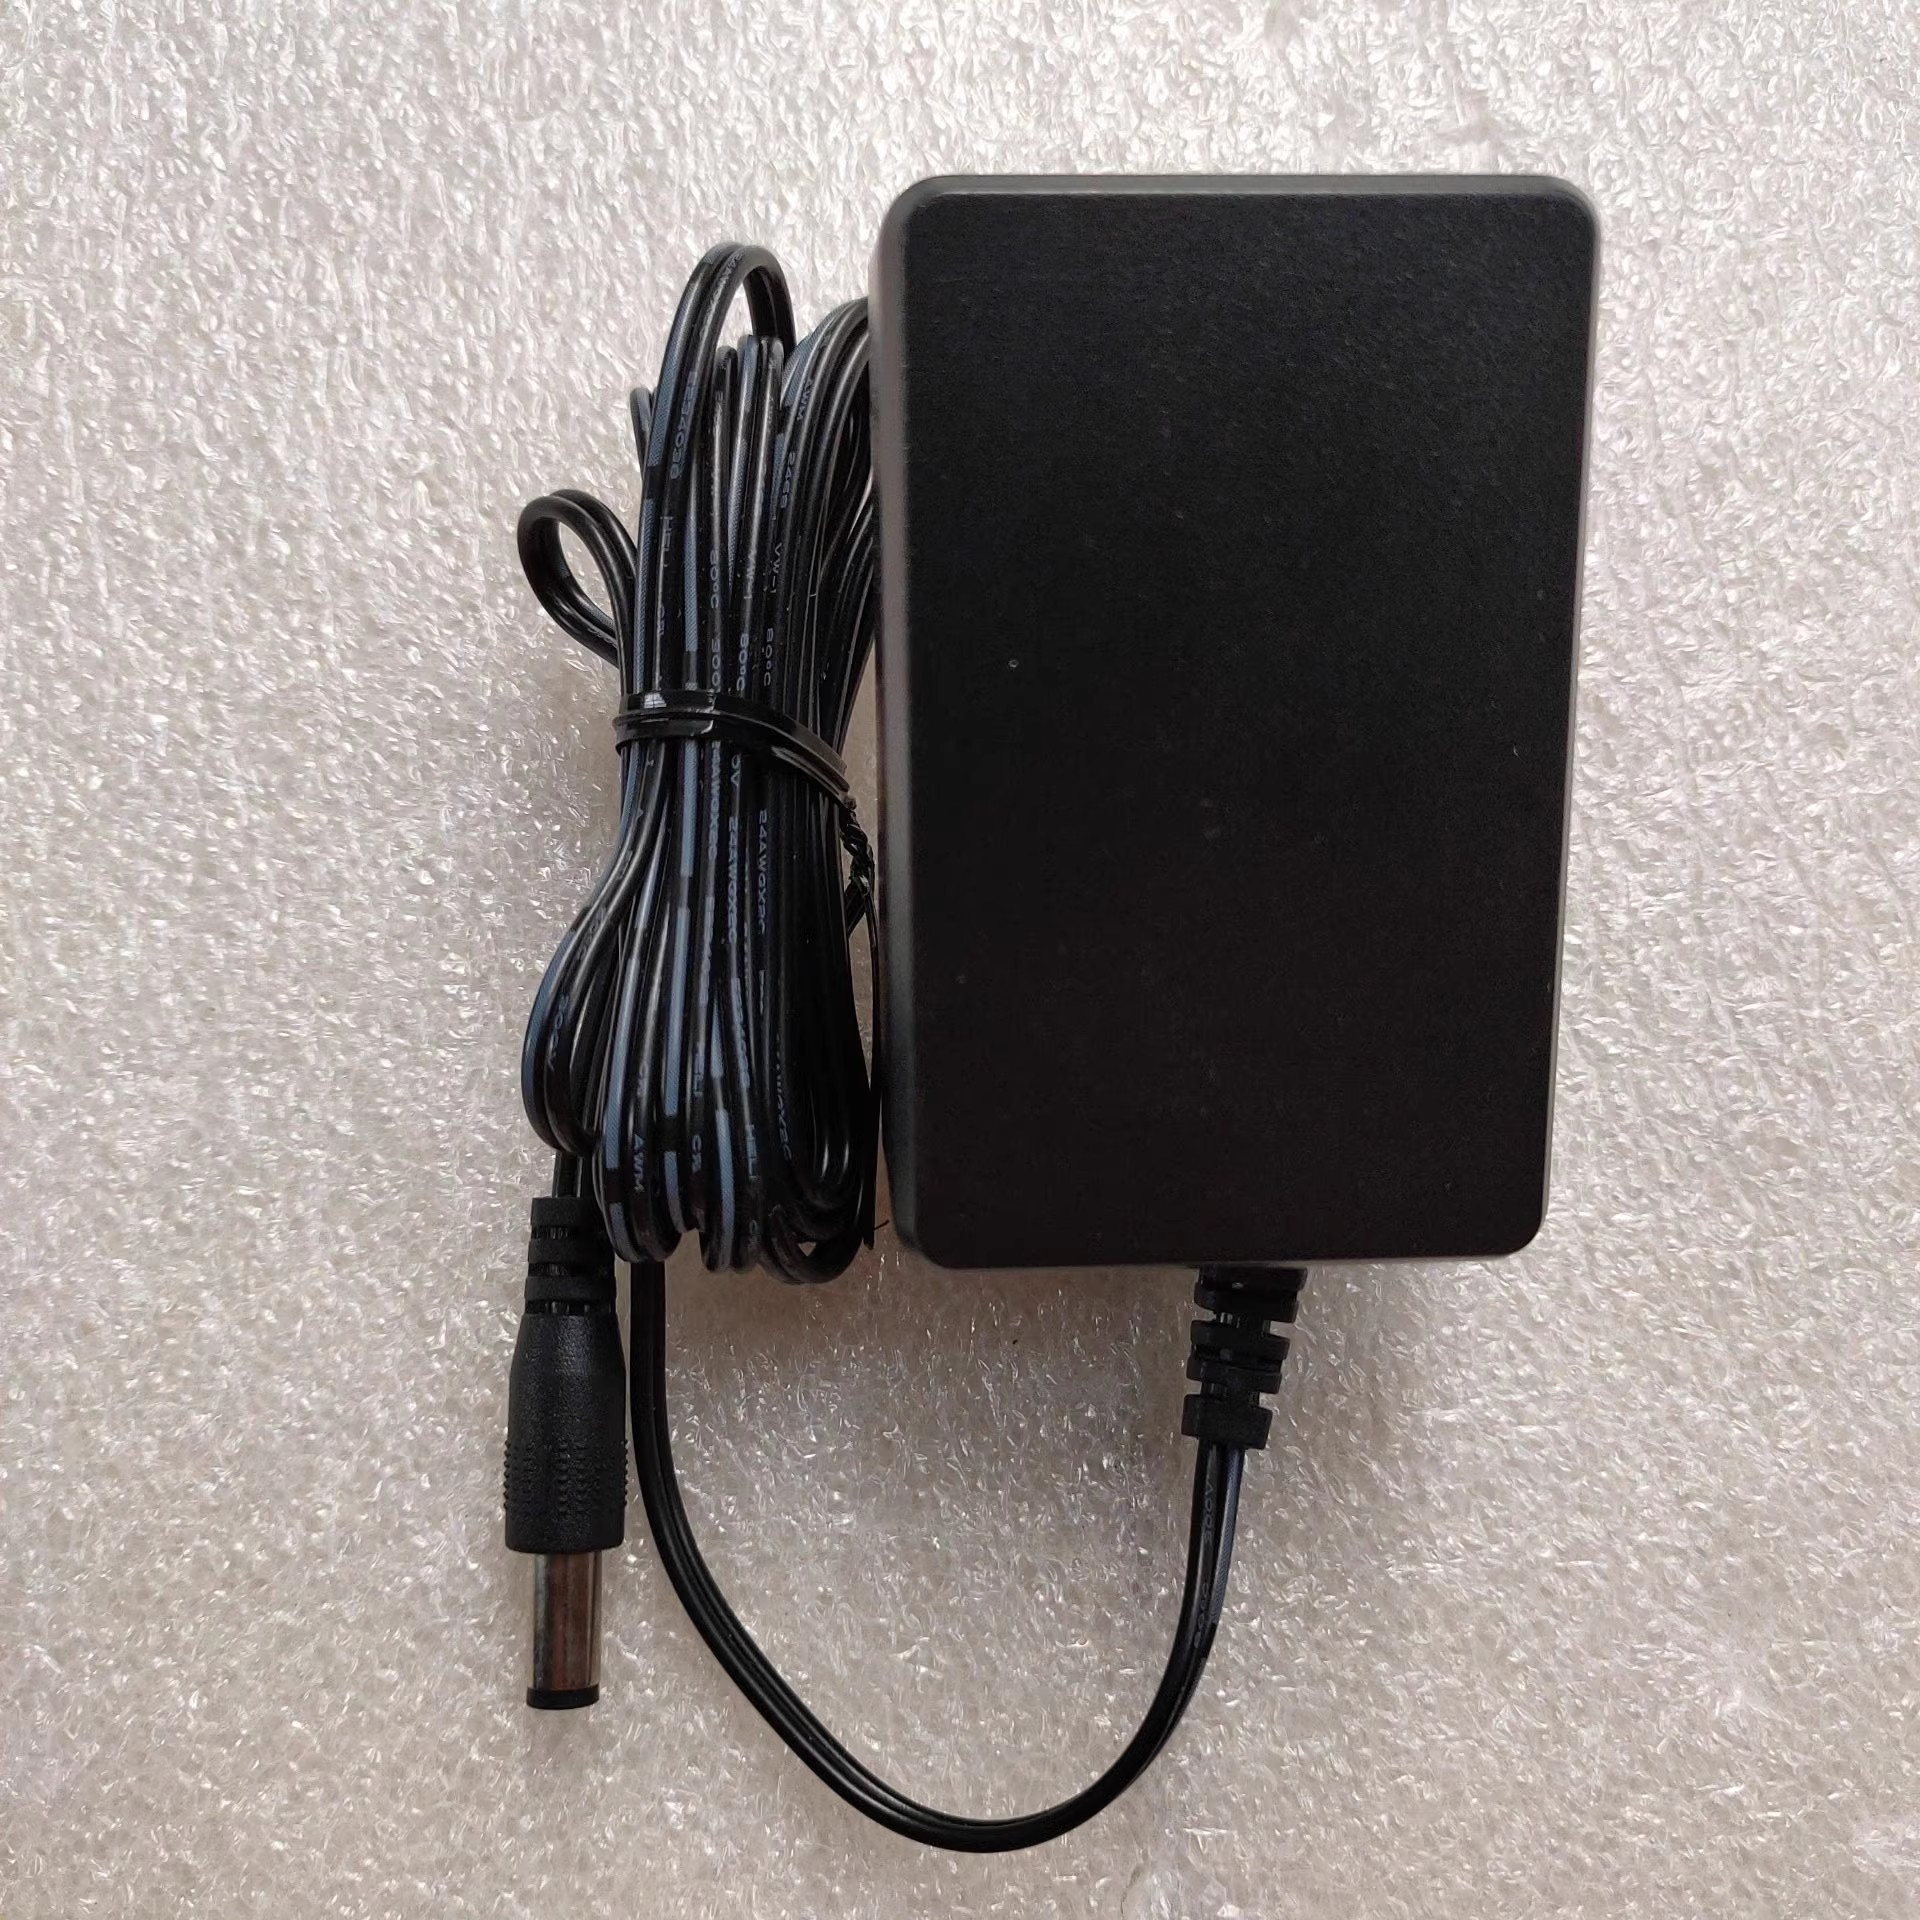 *Brand NEW*YLS0241A-C222050 POWER Supply 22.2V 500MA AC DC ADAPTHE